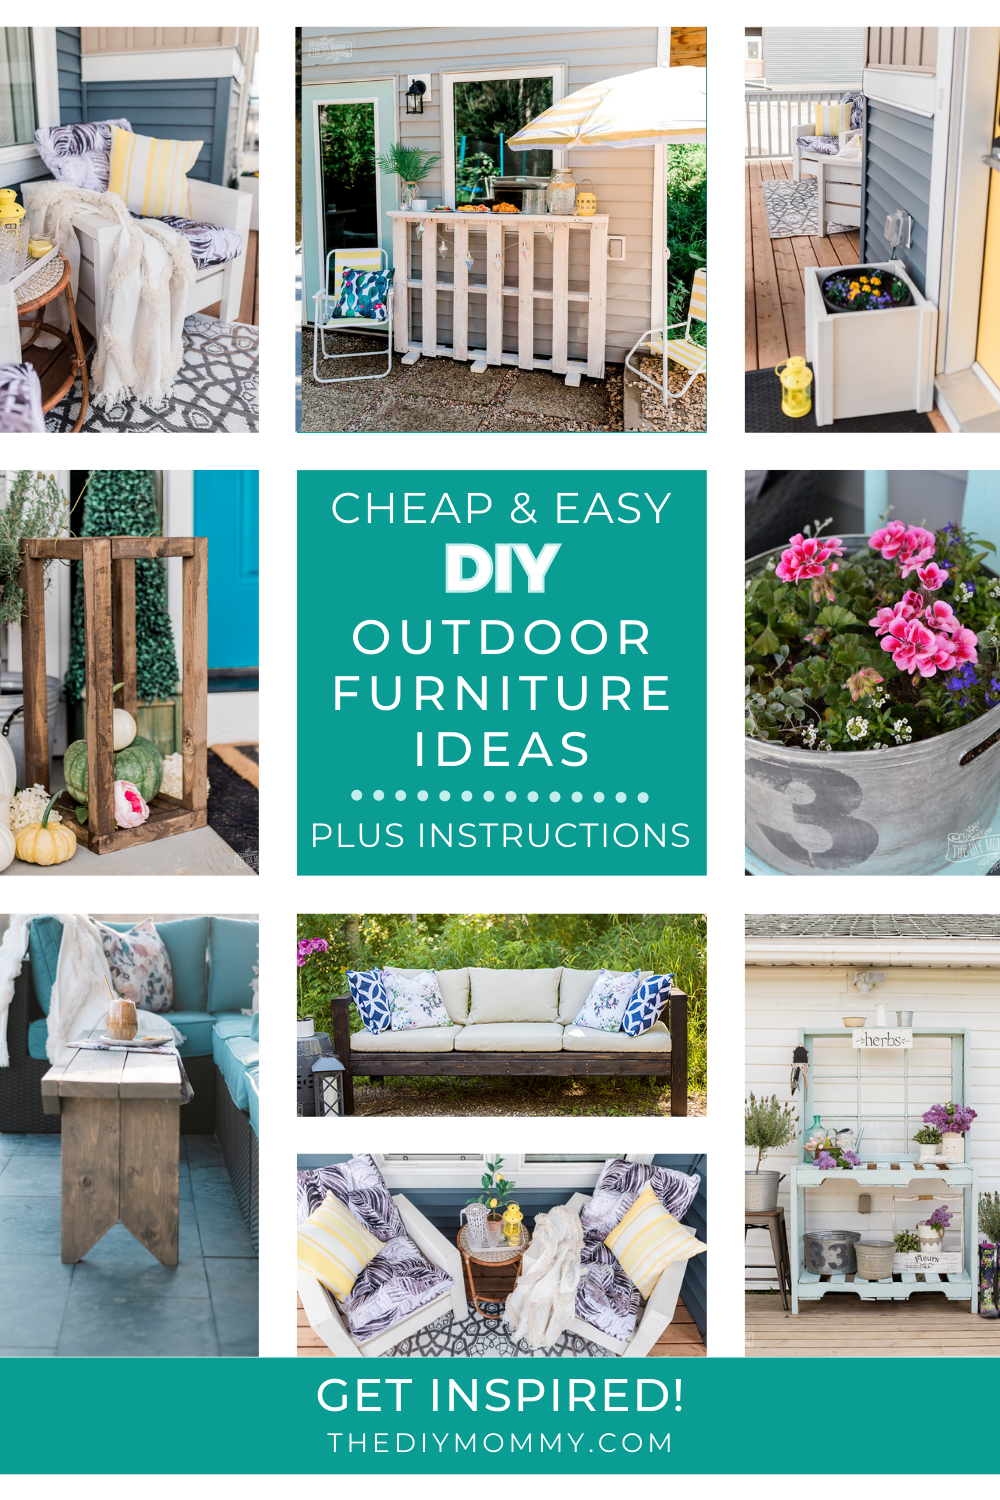 DIY outdoor furniture ideas including a potting bench, pallet bar, outoor sofa, rustic coffee table, chairs, lantern and planter boxes